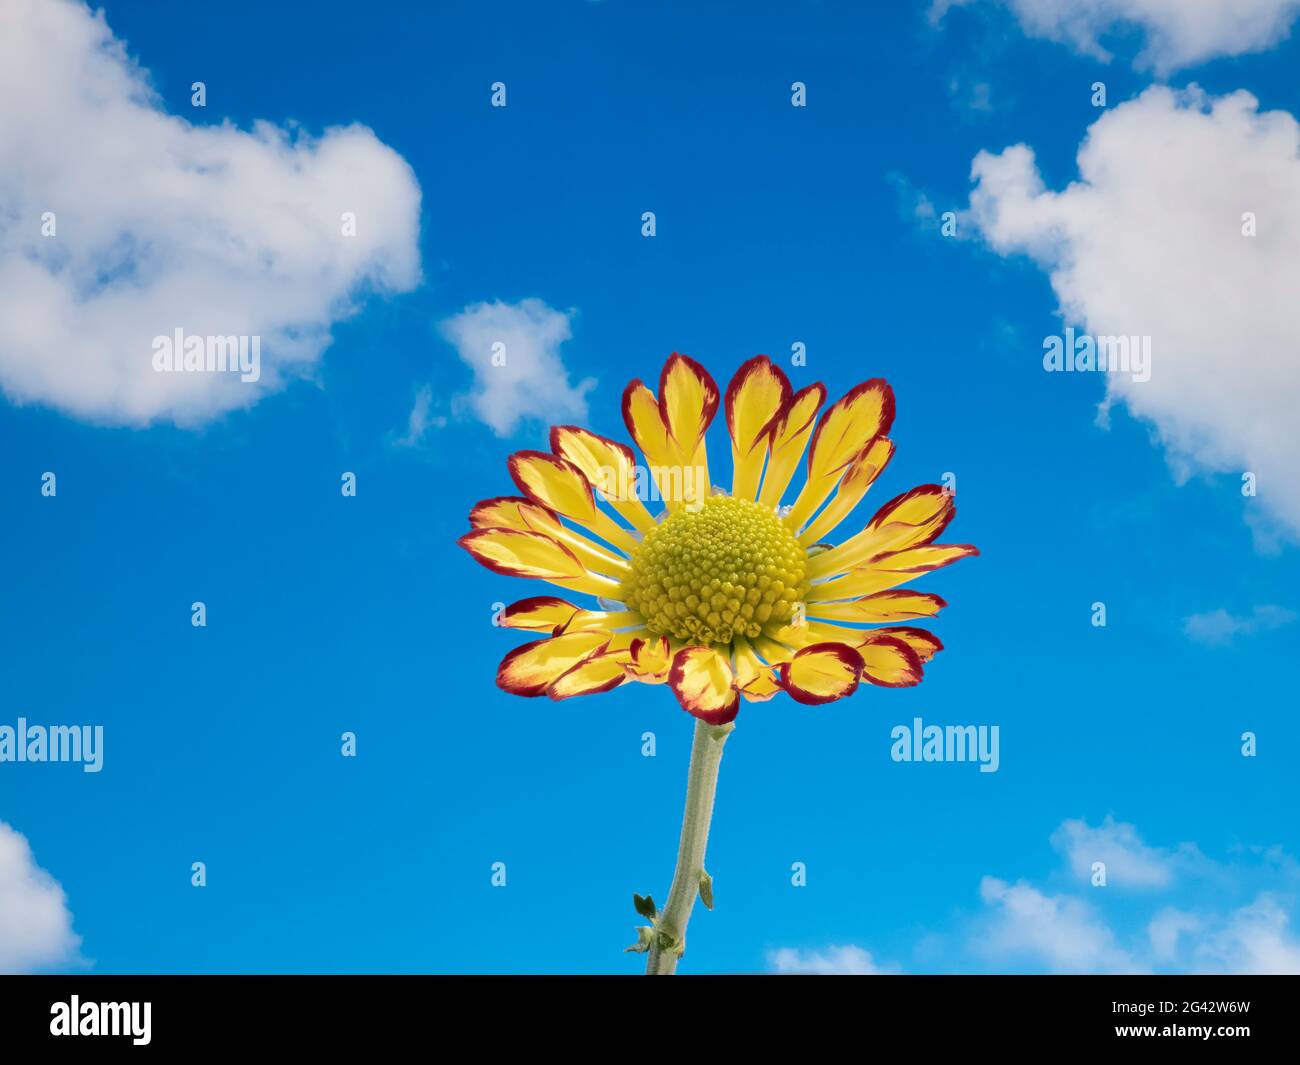 Close up of chrysanthemum against blue sky with fluffy white clouds Stock Photo